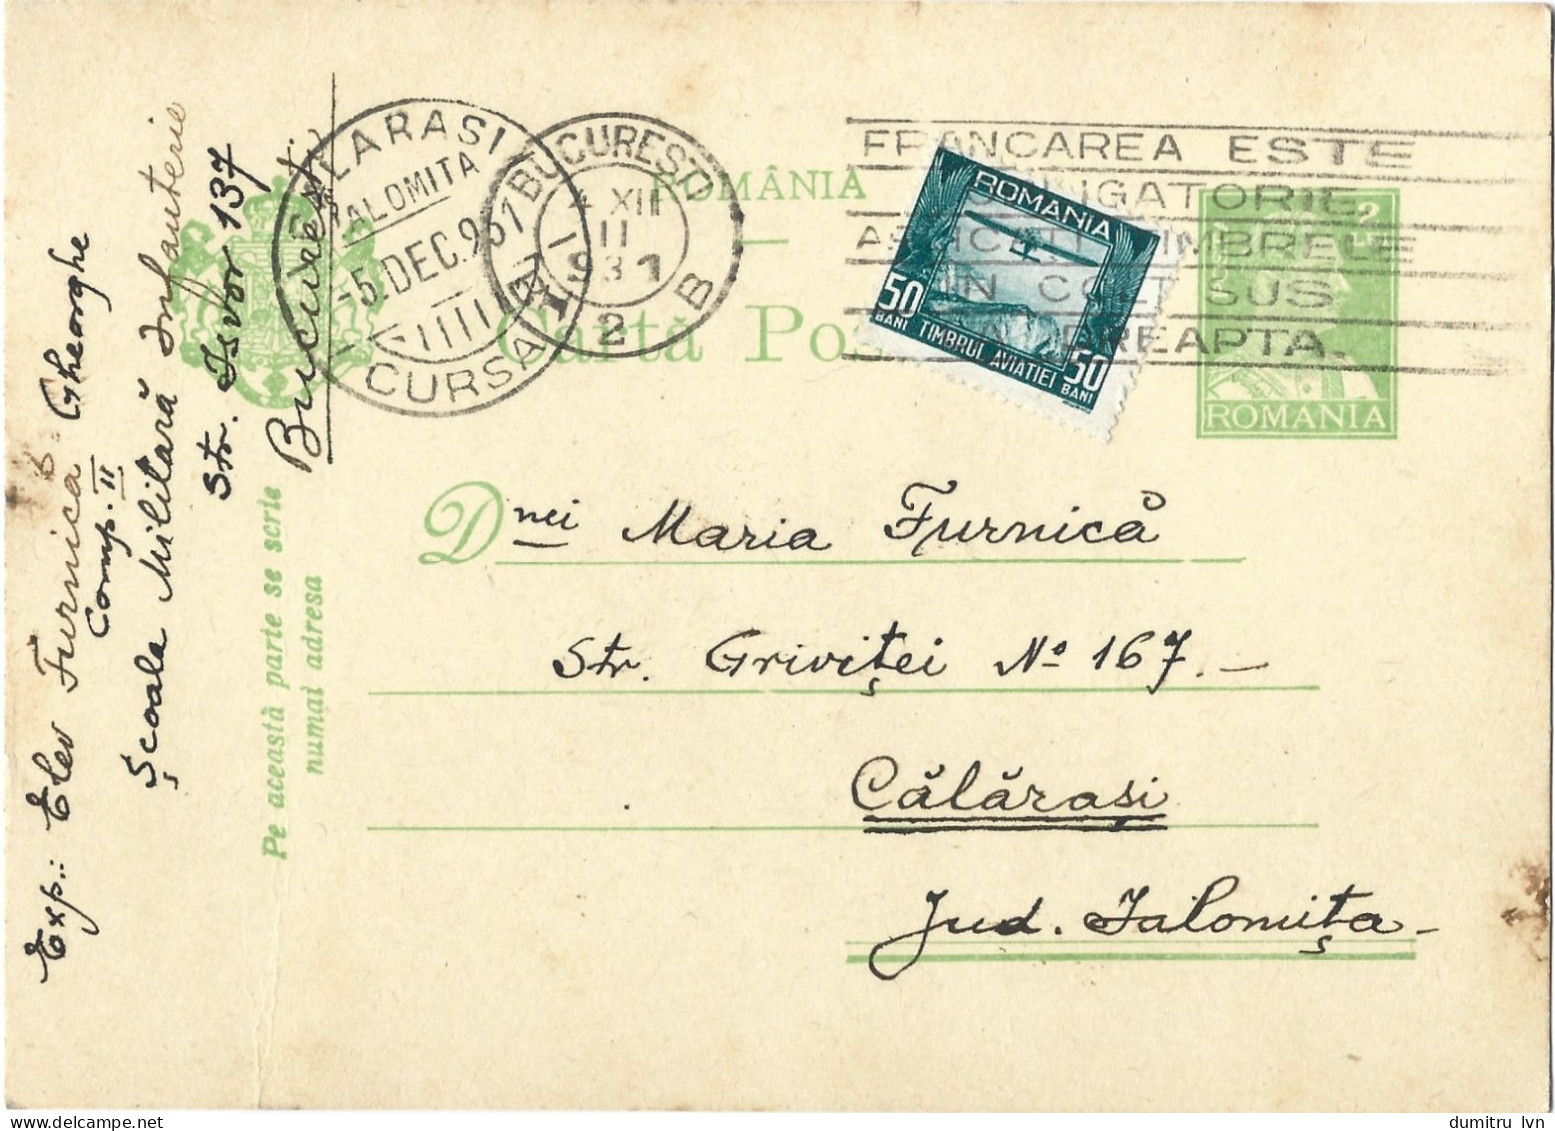 ROMANIA 1931 POSTCARD, ADVERTISING STAMP, POSTCARD STATIONERY - World War 2 Letters